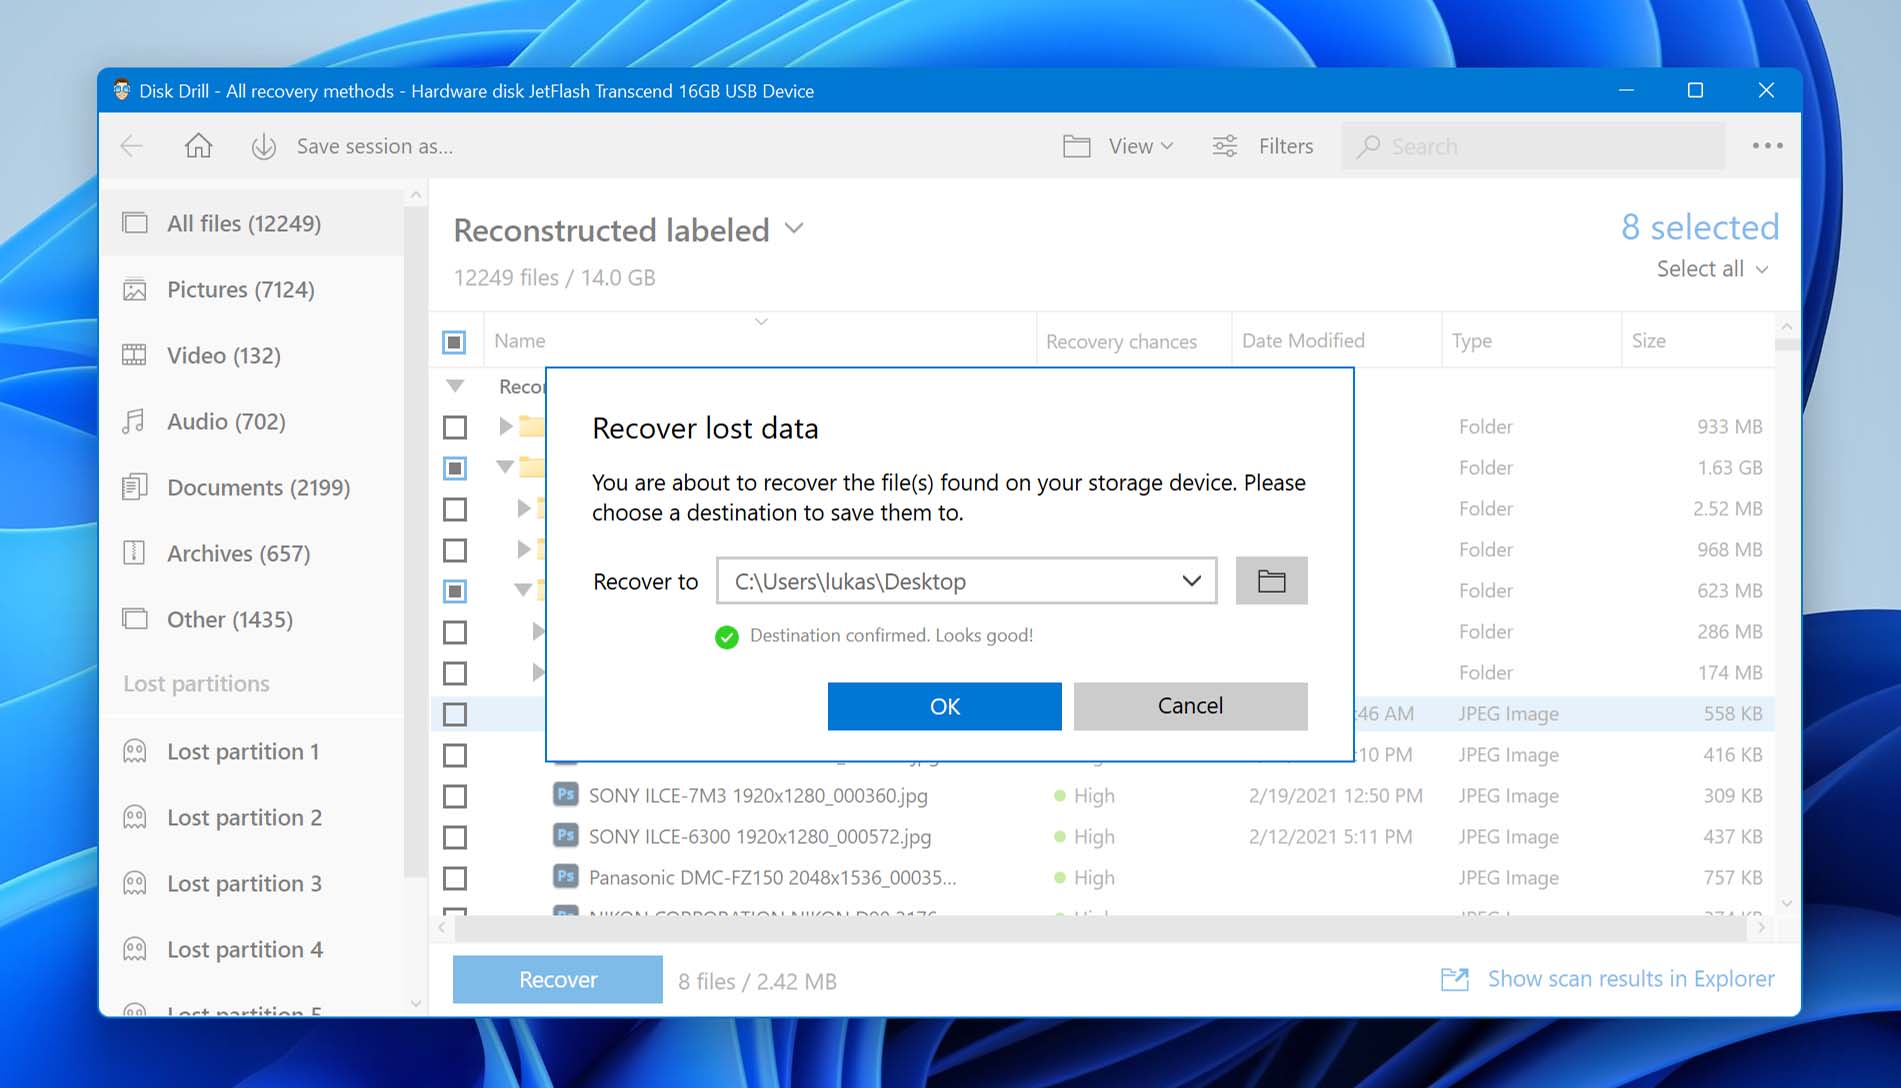 Choose location to recover lost files.